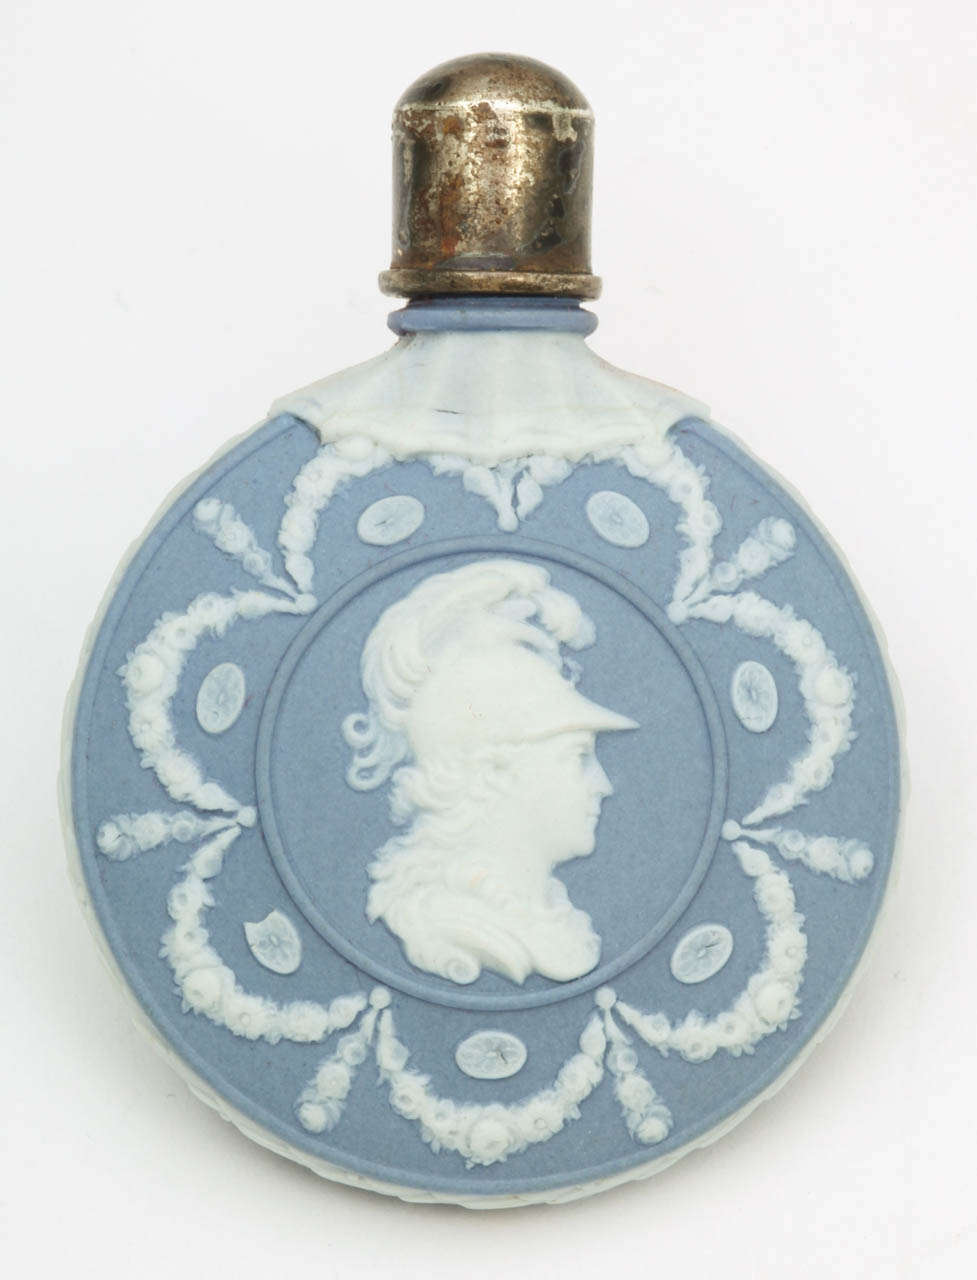 British A Rare Unmarked Wedgwood Jasper Scent Bottle With George III